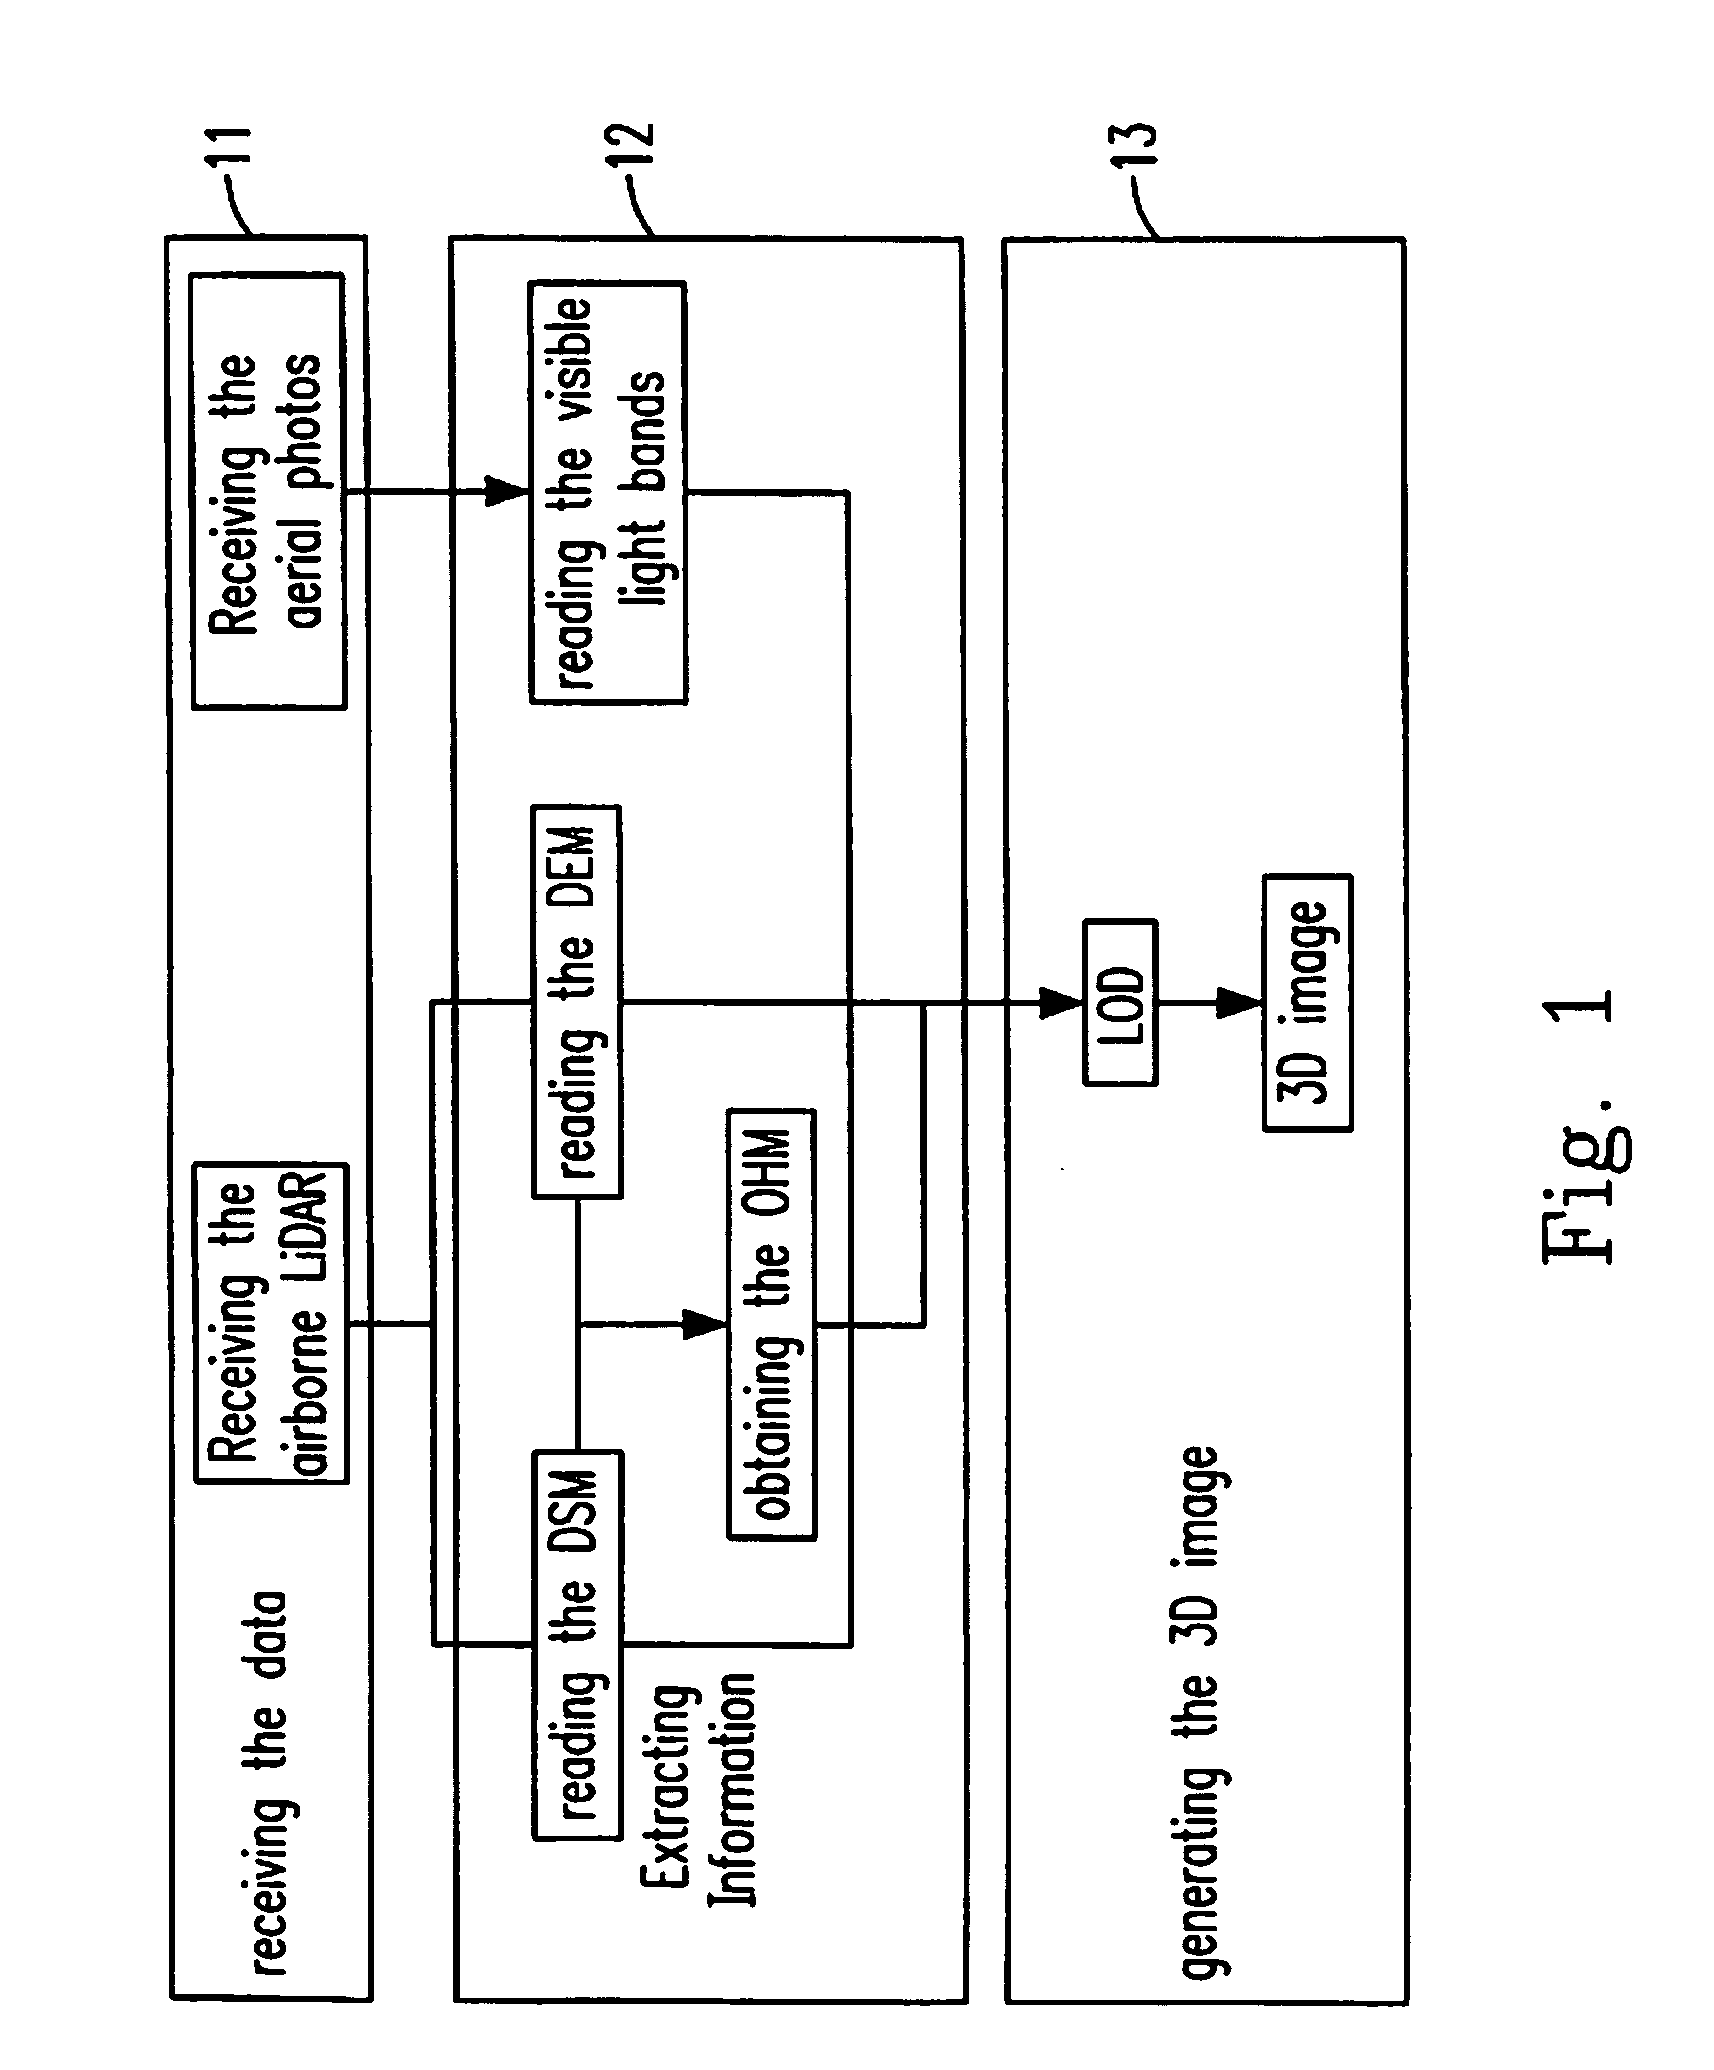 Target detecting, editing and rebuilding method and system by 3D image